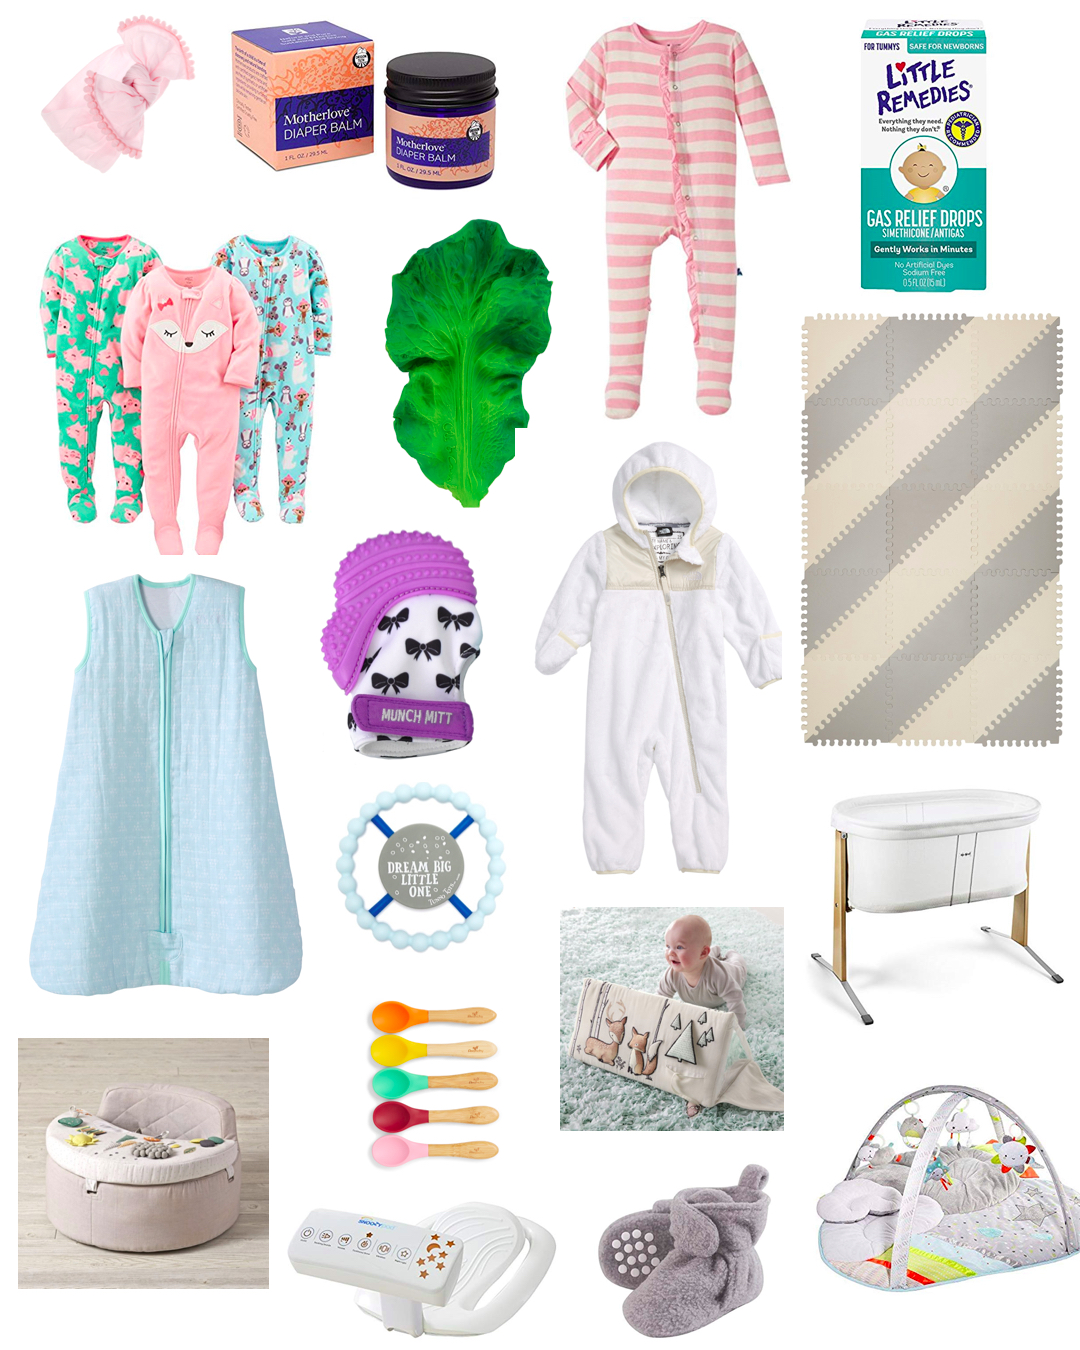 Reno Nevada blogger, Emily Farren Wieczorek shares her favorite baby items in her Gift Guide for Babies list